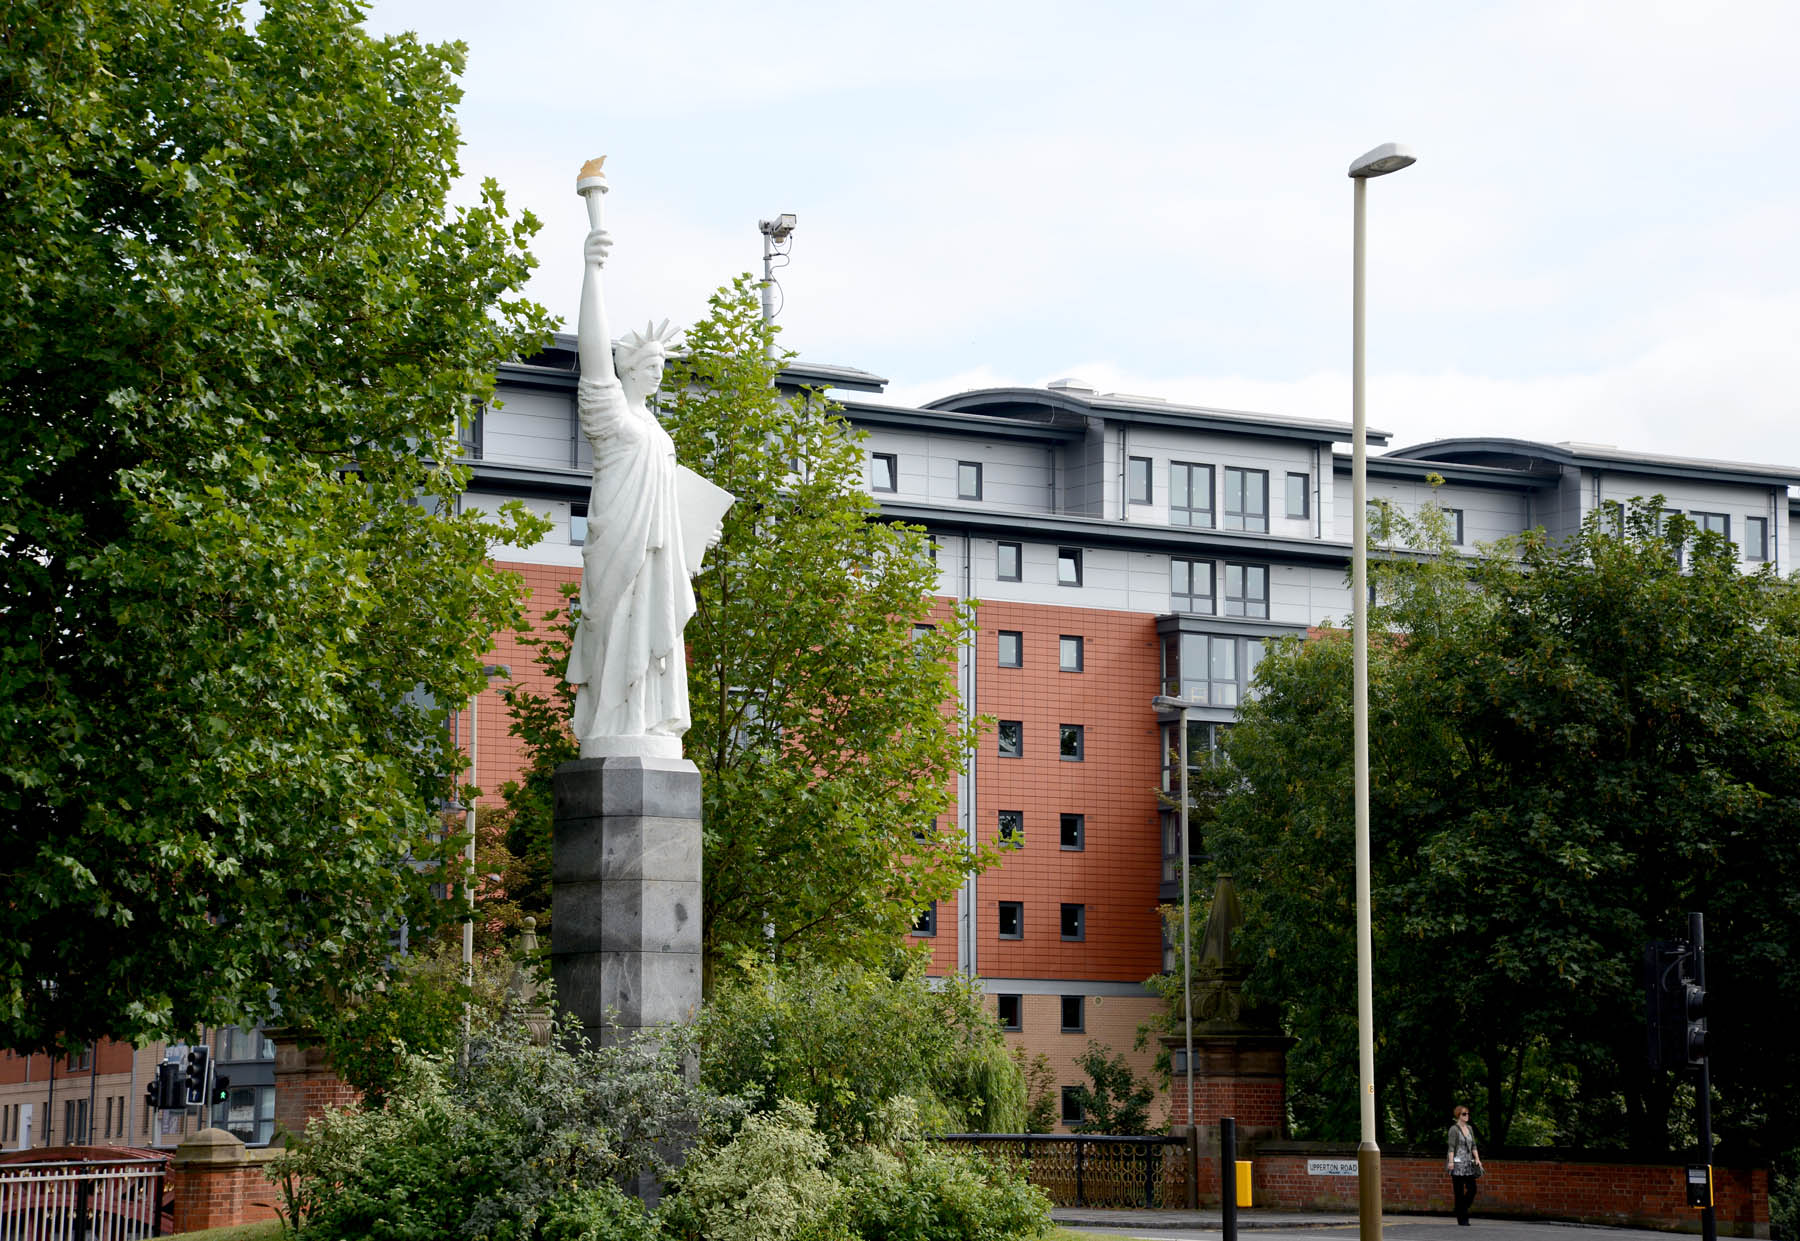 The statue in its new roundabout location -